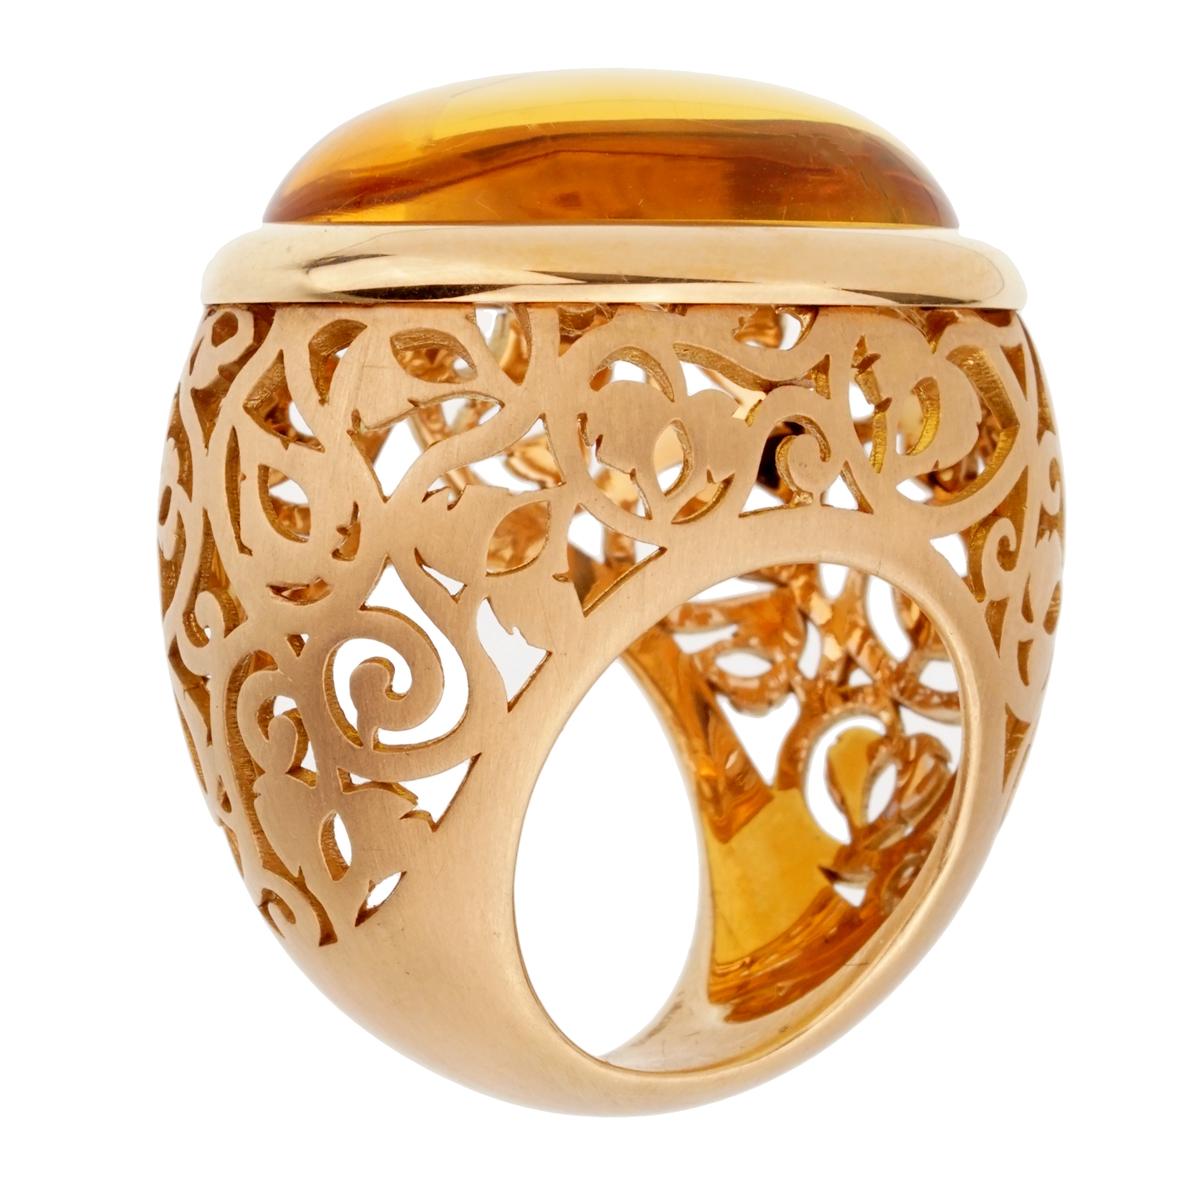 A magnificent brand new Pomellato rose gold cocktail ring showcasing a 19.94ct cabochon Amber. The ring measures a size 5.25 and can be resized.

Pomellato Retail Price: $7,800
Sku: 2317